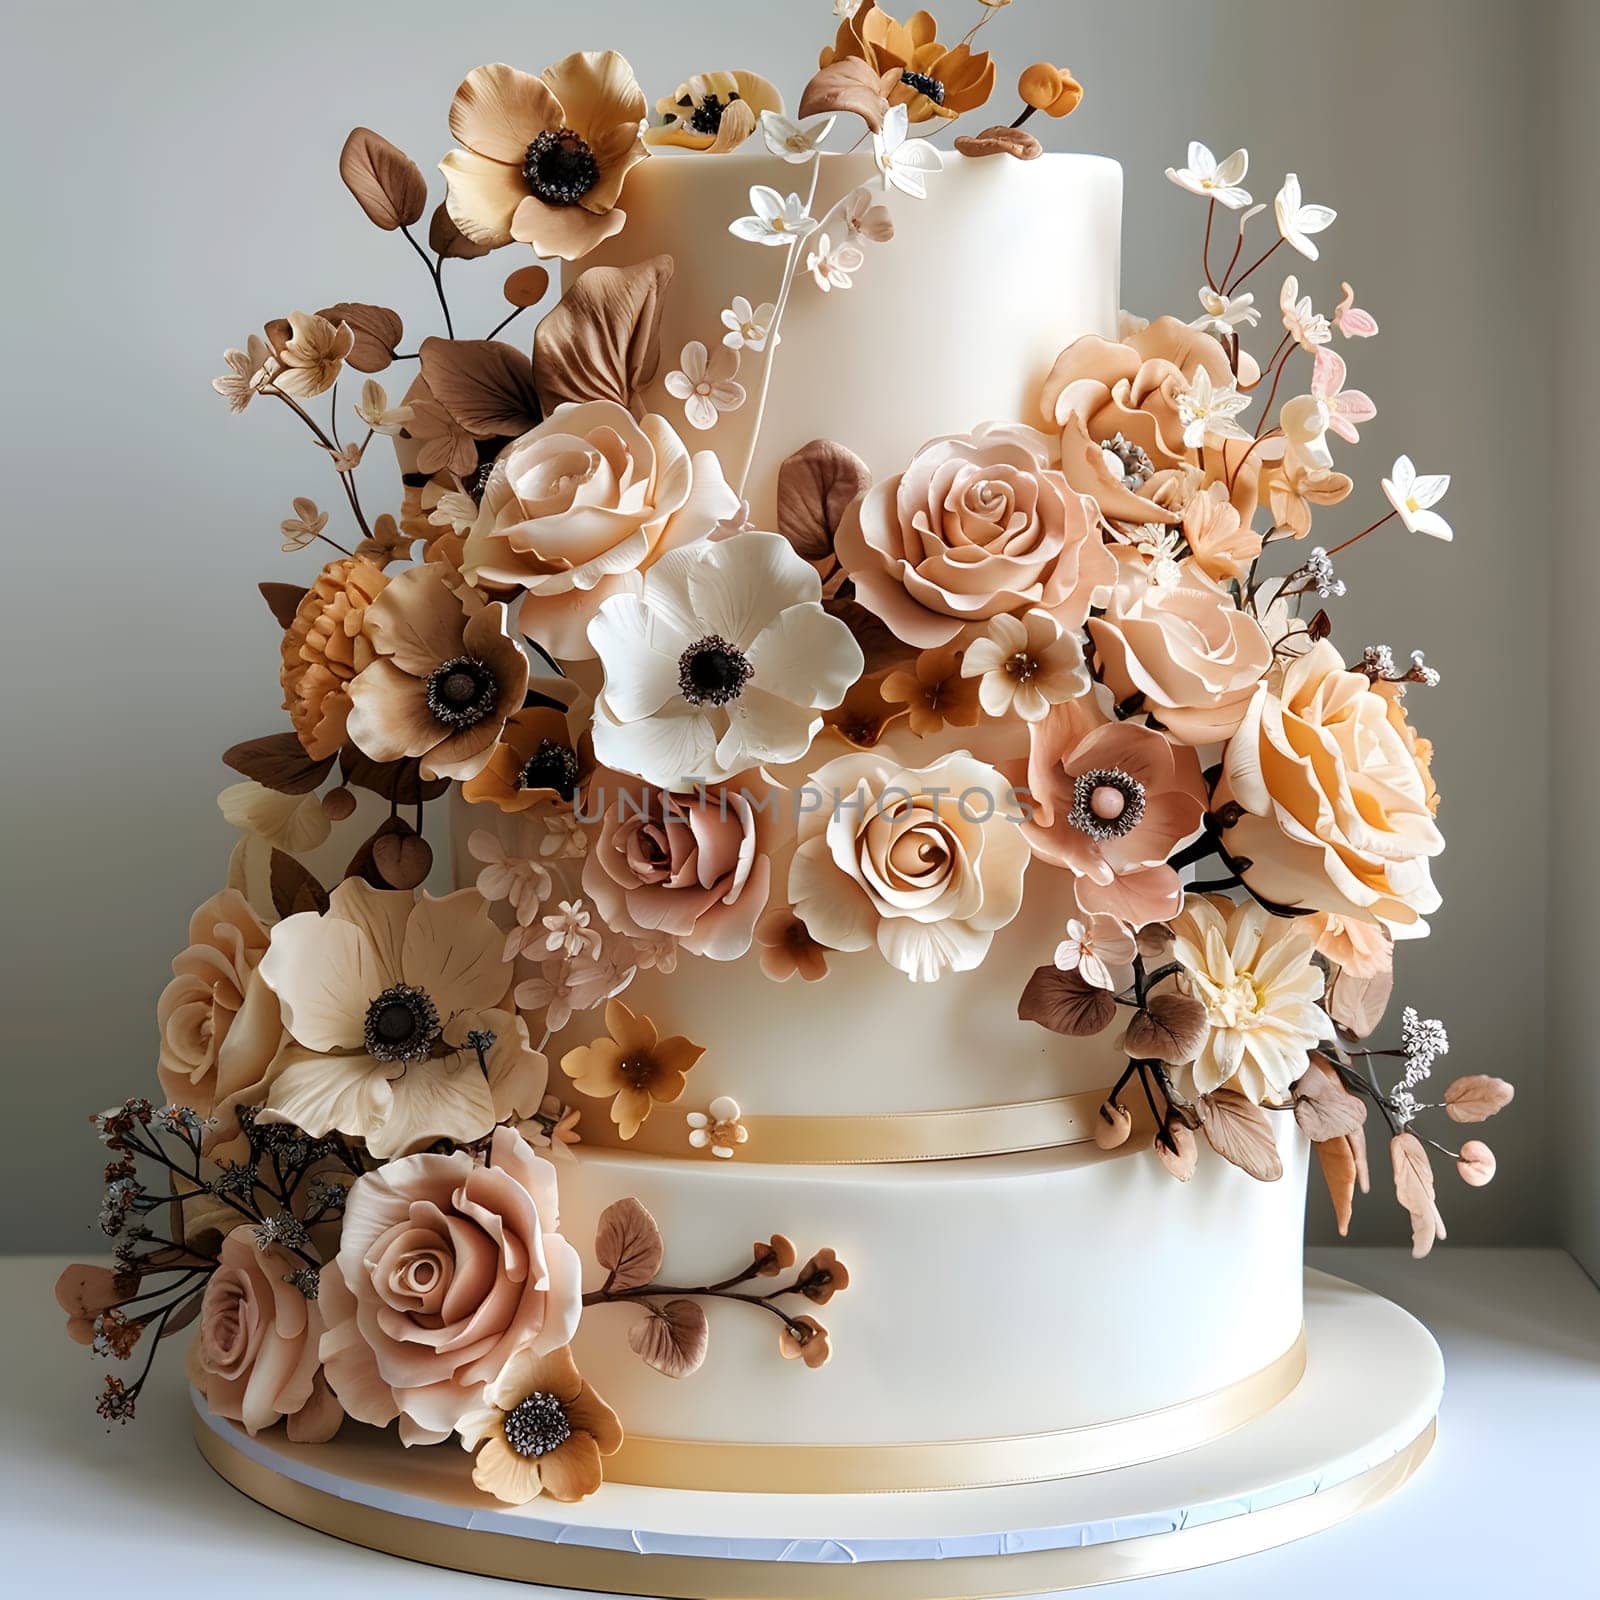 A threetiered wedding cake adorned with beautiful flowers, a stunning display of cake decorating and culinary artistry using fresh petals as an ingredient